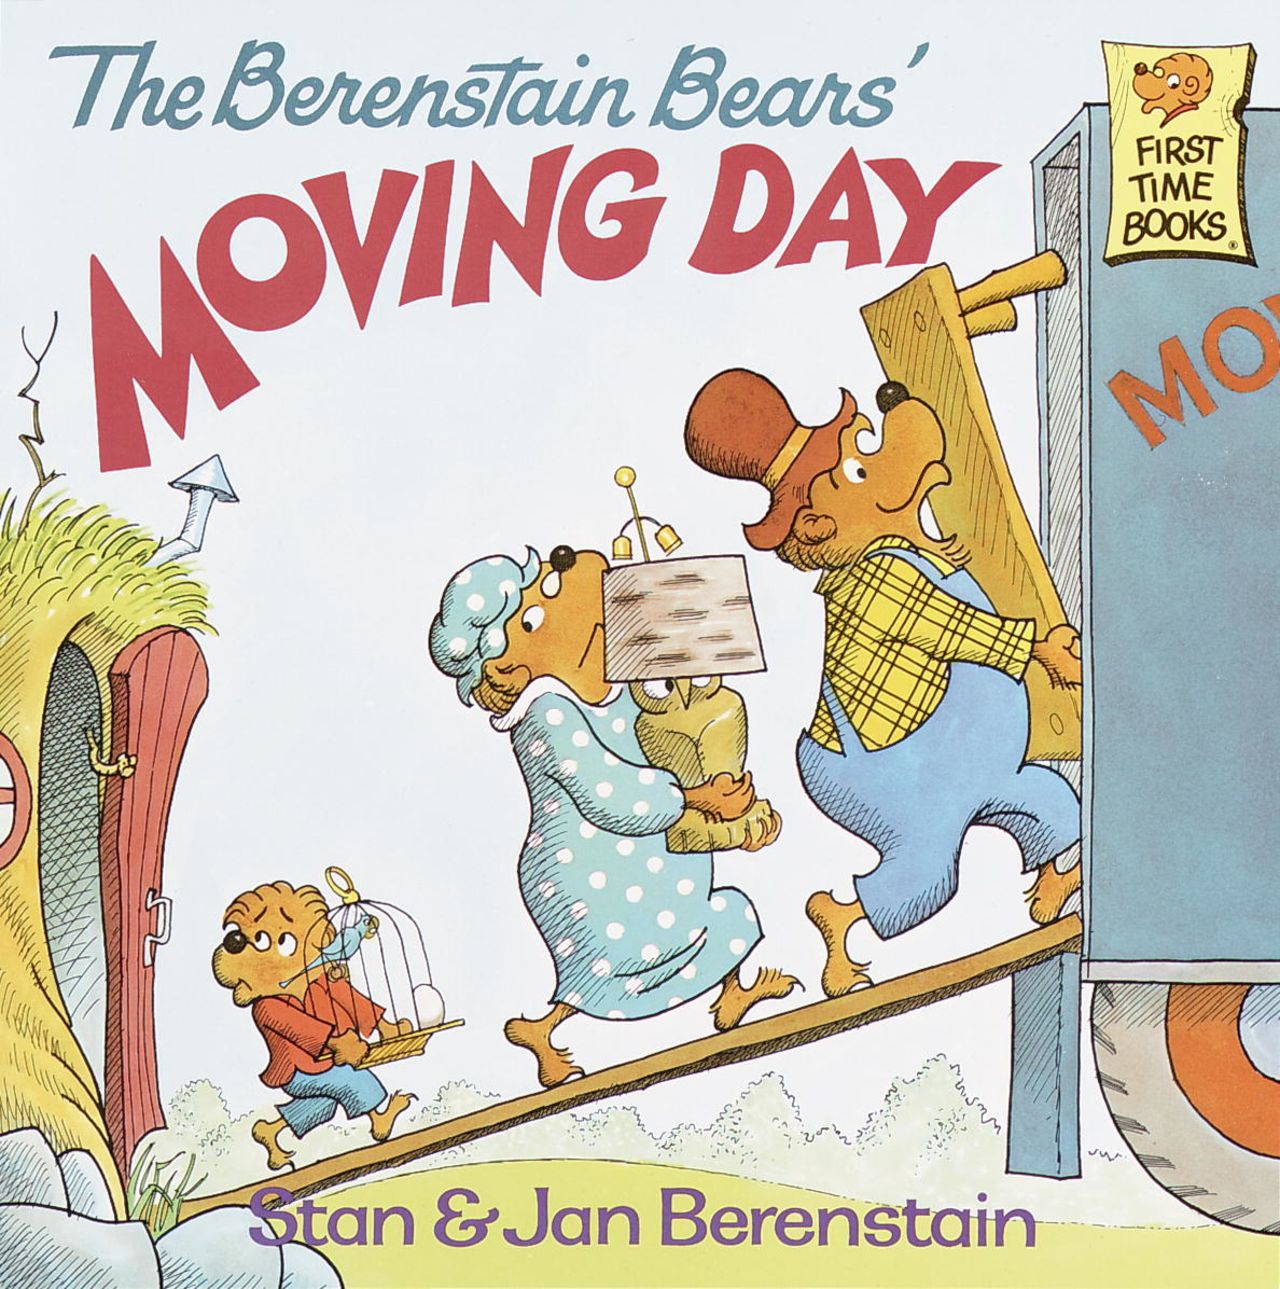 This Stan and Jan Berenstain classic has helped many families move. 